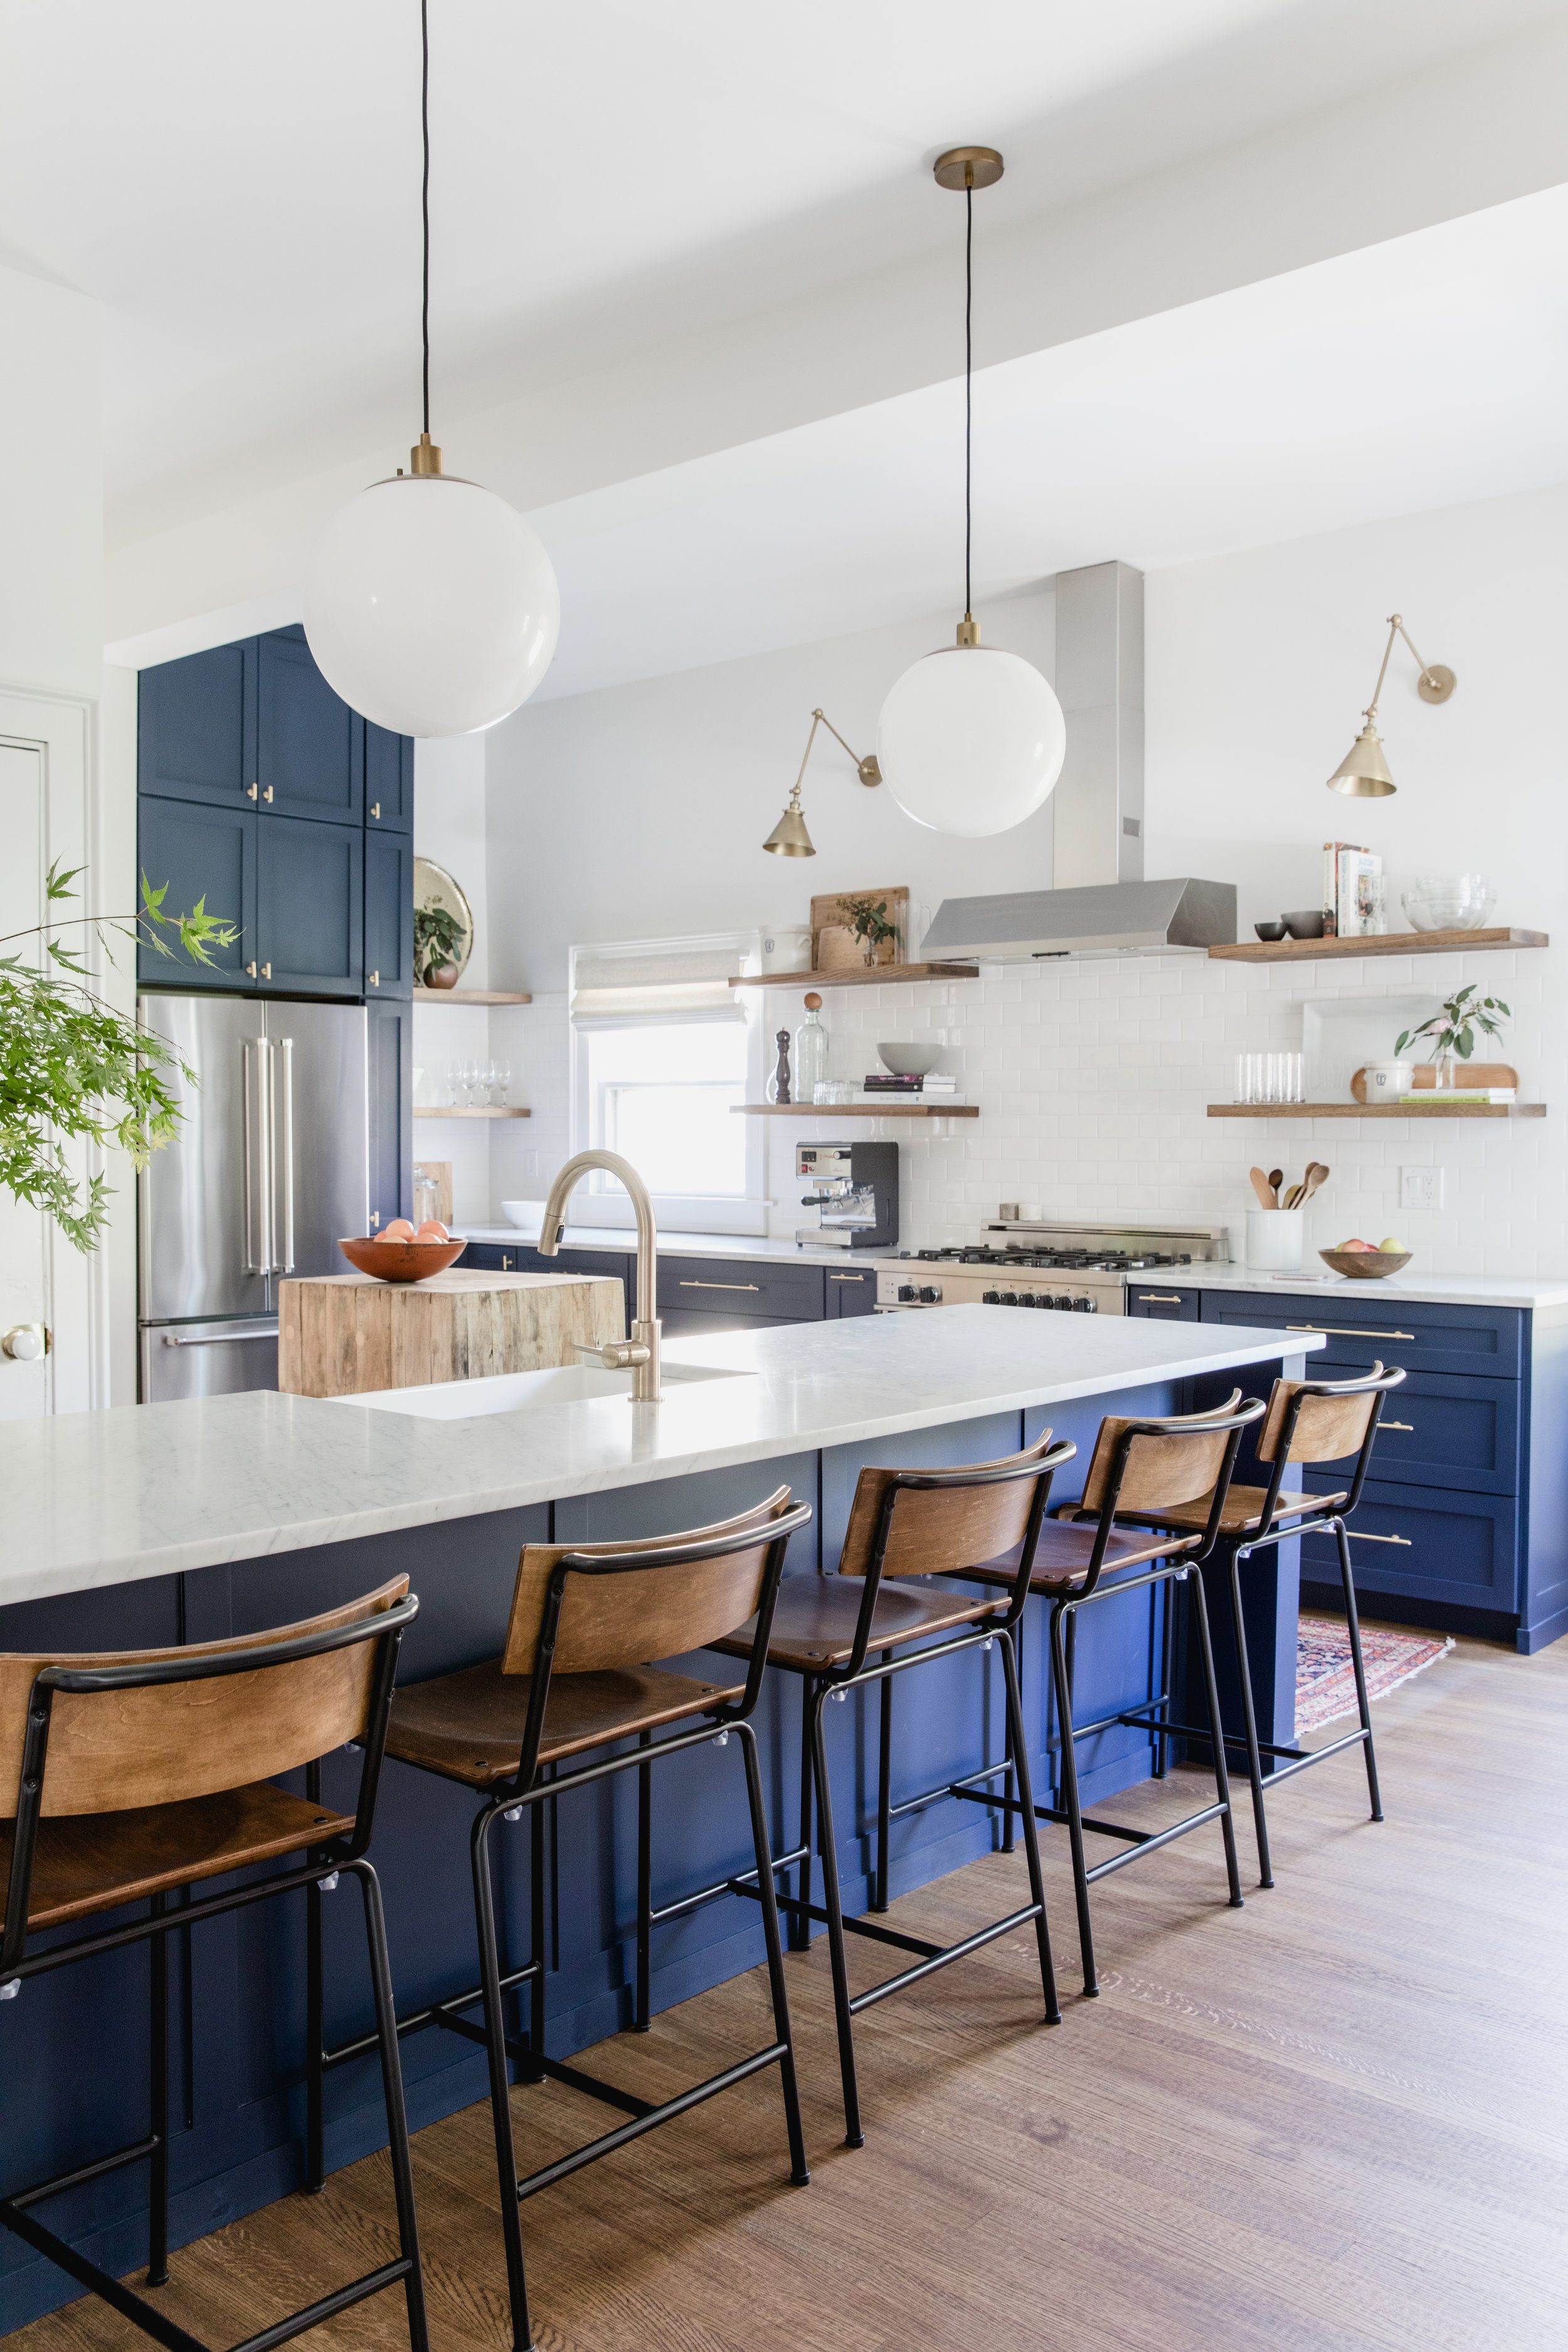 How To Choose the Right Bar Stools For Your Kitchen Island Or ...